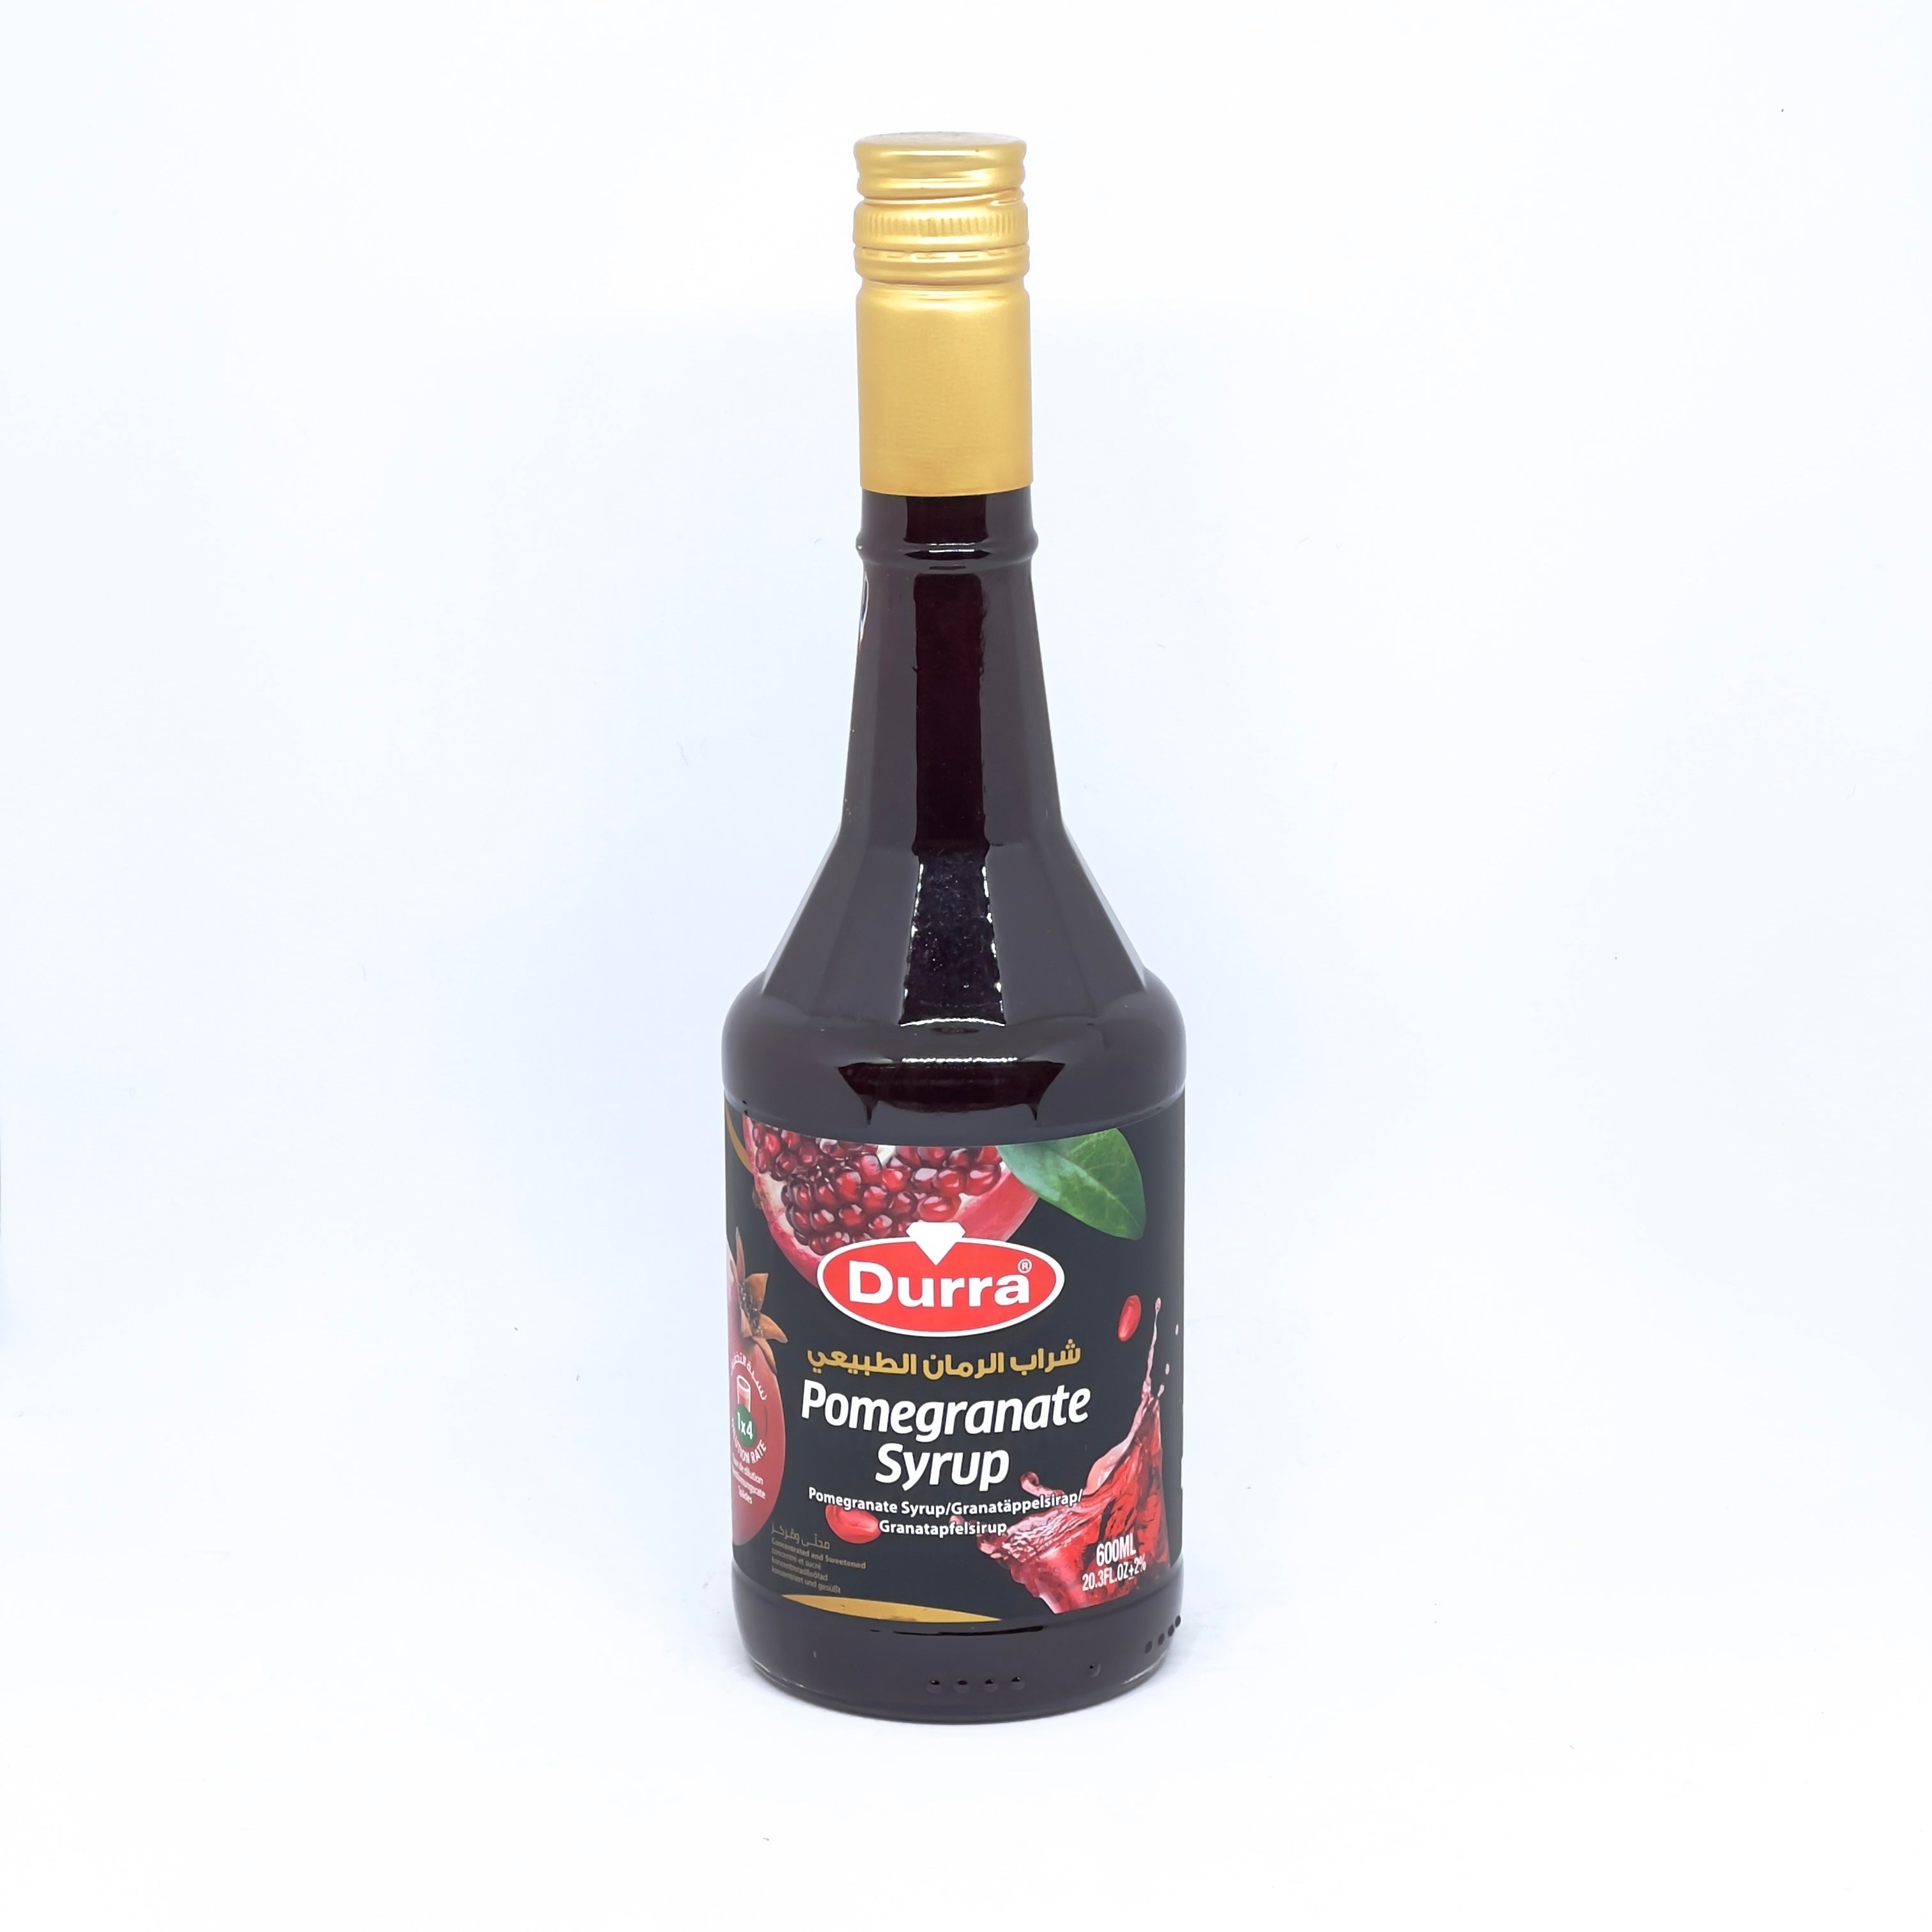 DURRA Pomegranate Syrup Cordial 450g